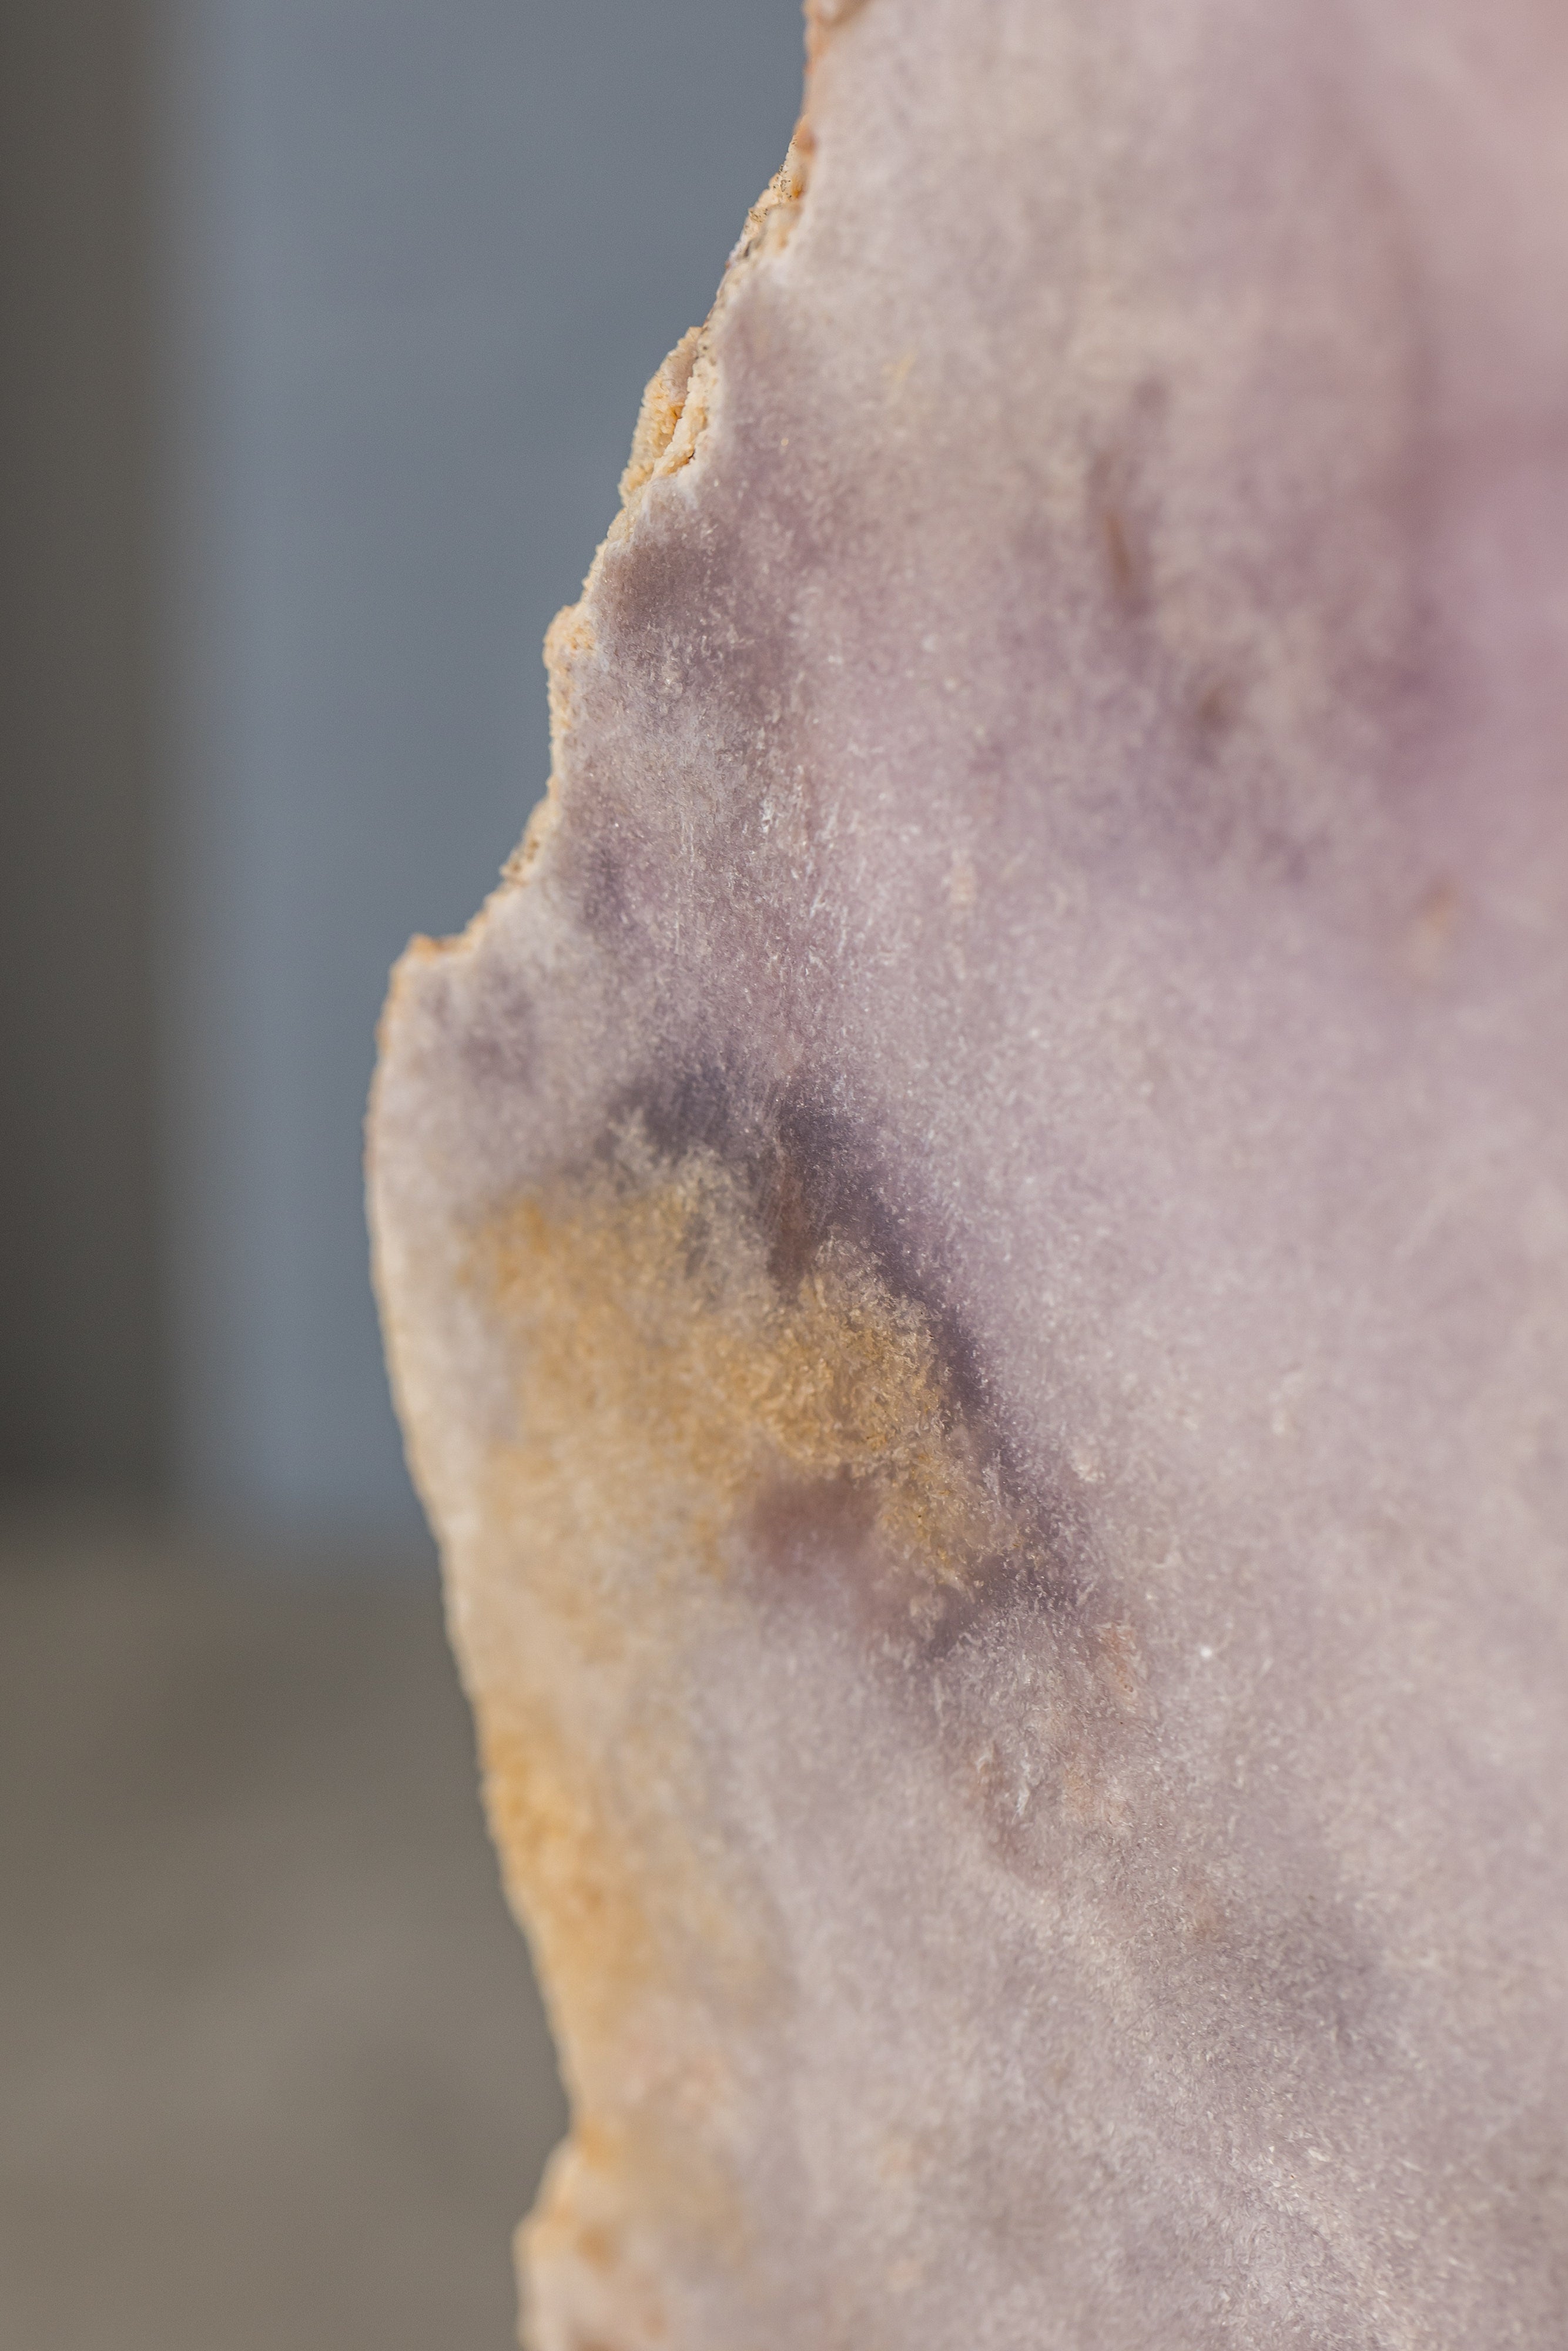 Large Pink Amethyst on Stand with Druzy - Elegant Crystal Decor for Love and Emotional Healing - Everyday Rocks